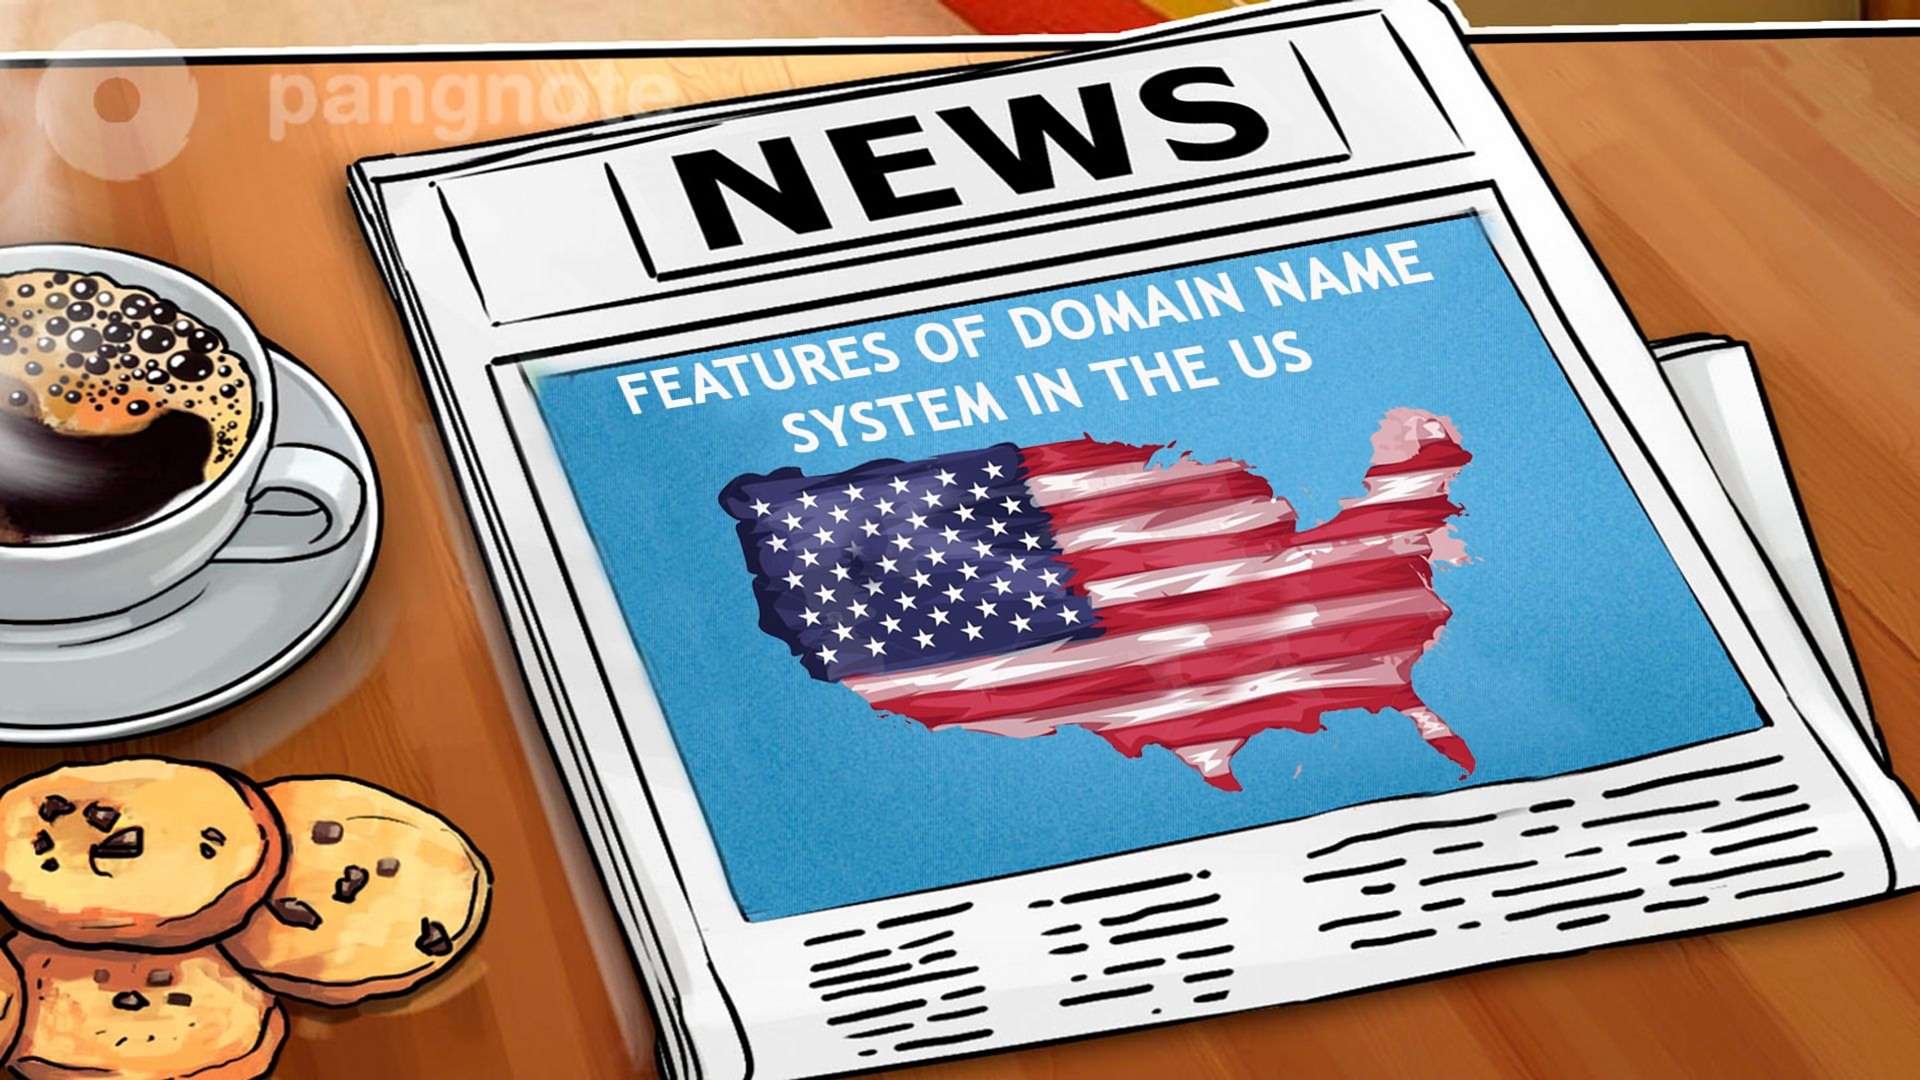 Features of domain name system in the US